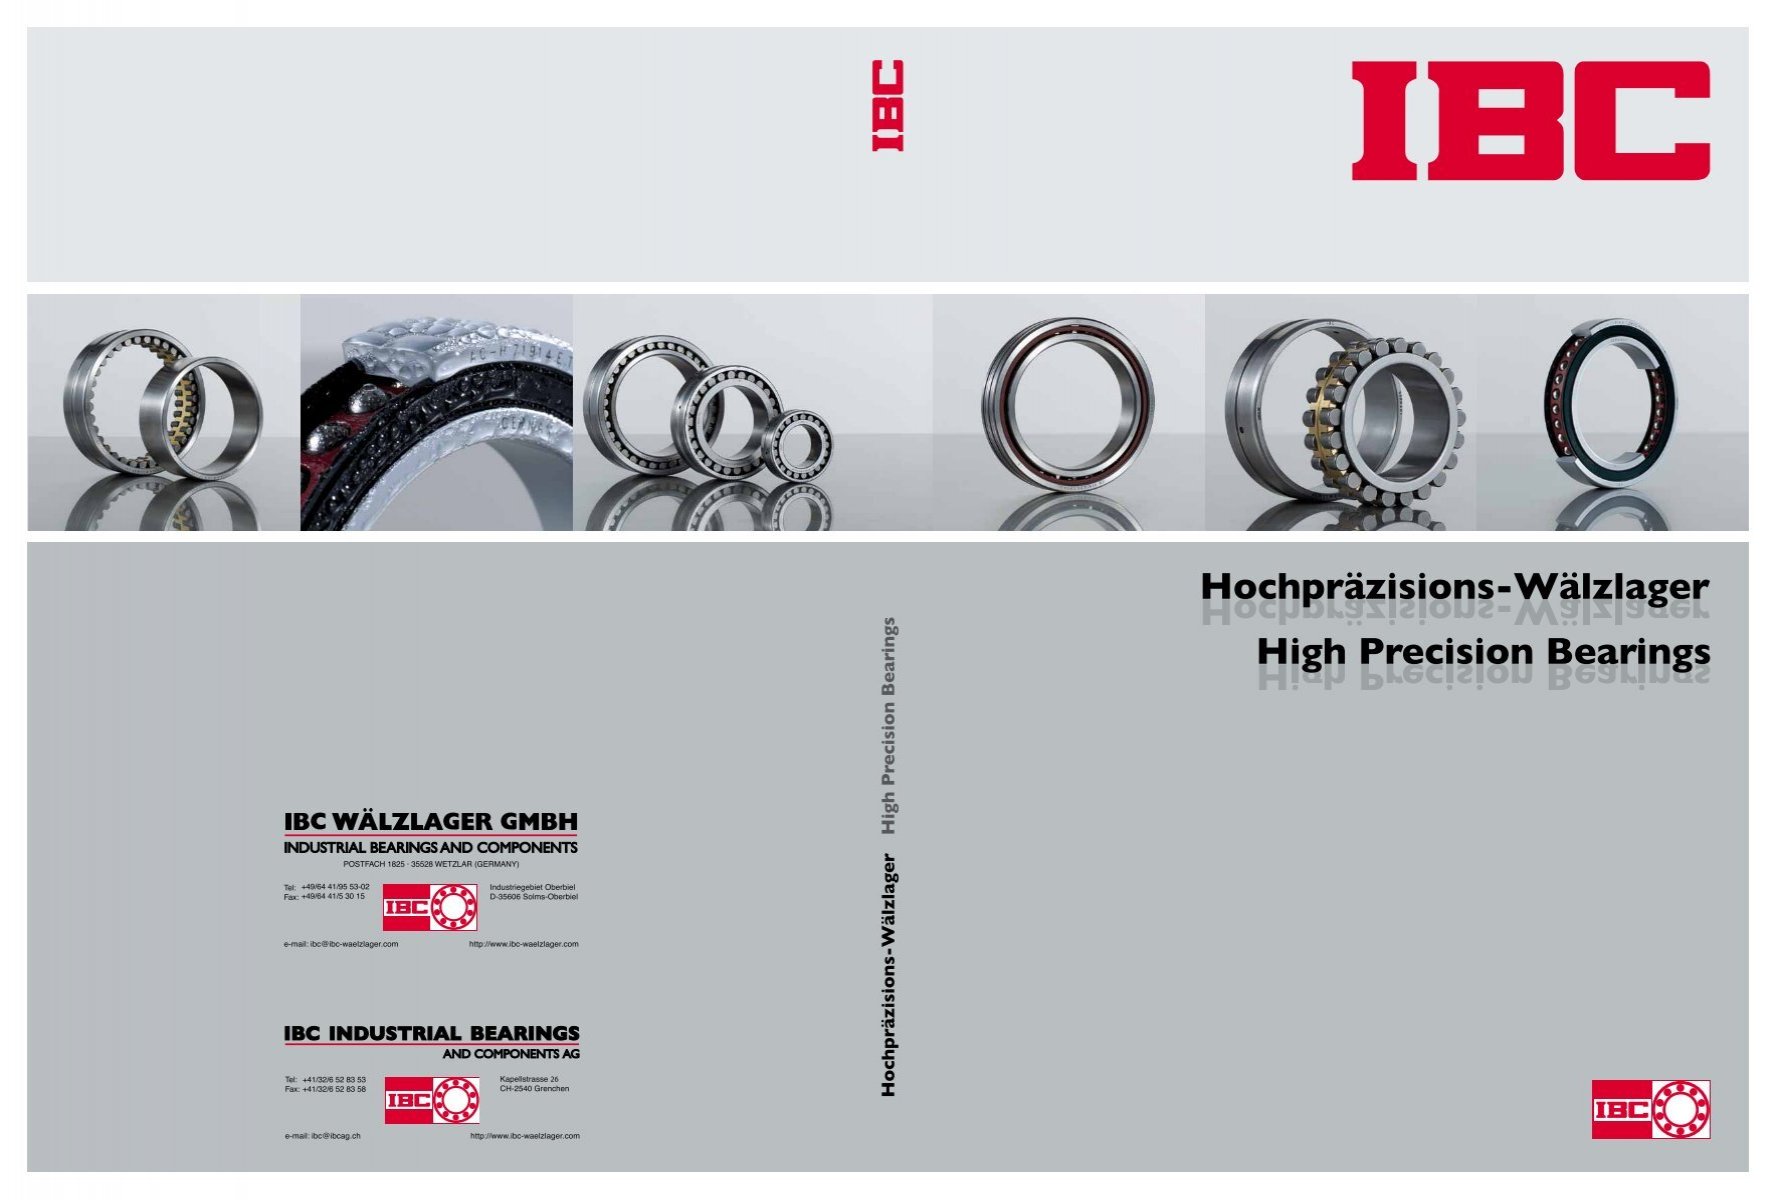 Hochpräzisions-Wälzlager High Precision Bearings